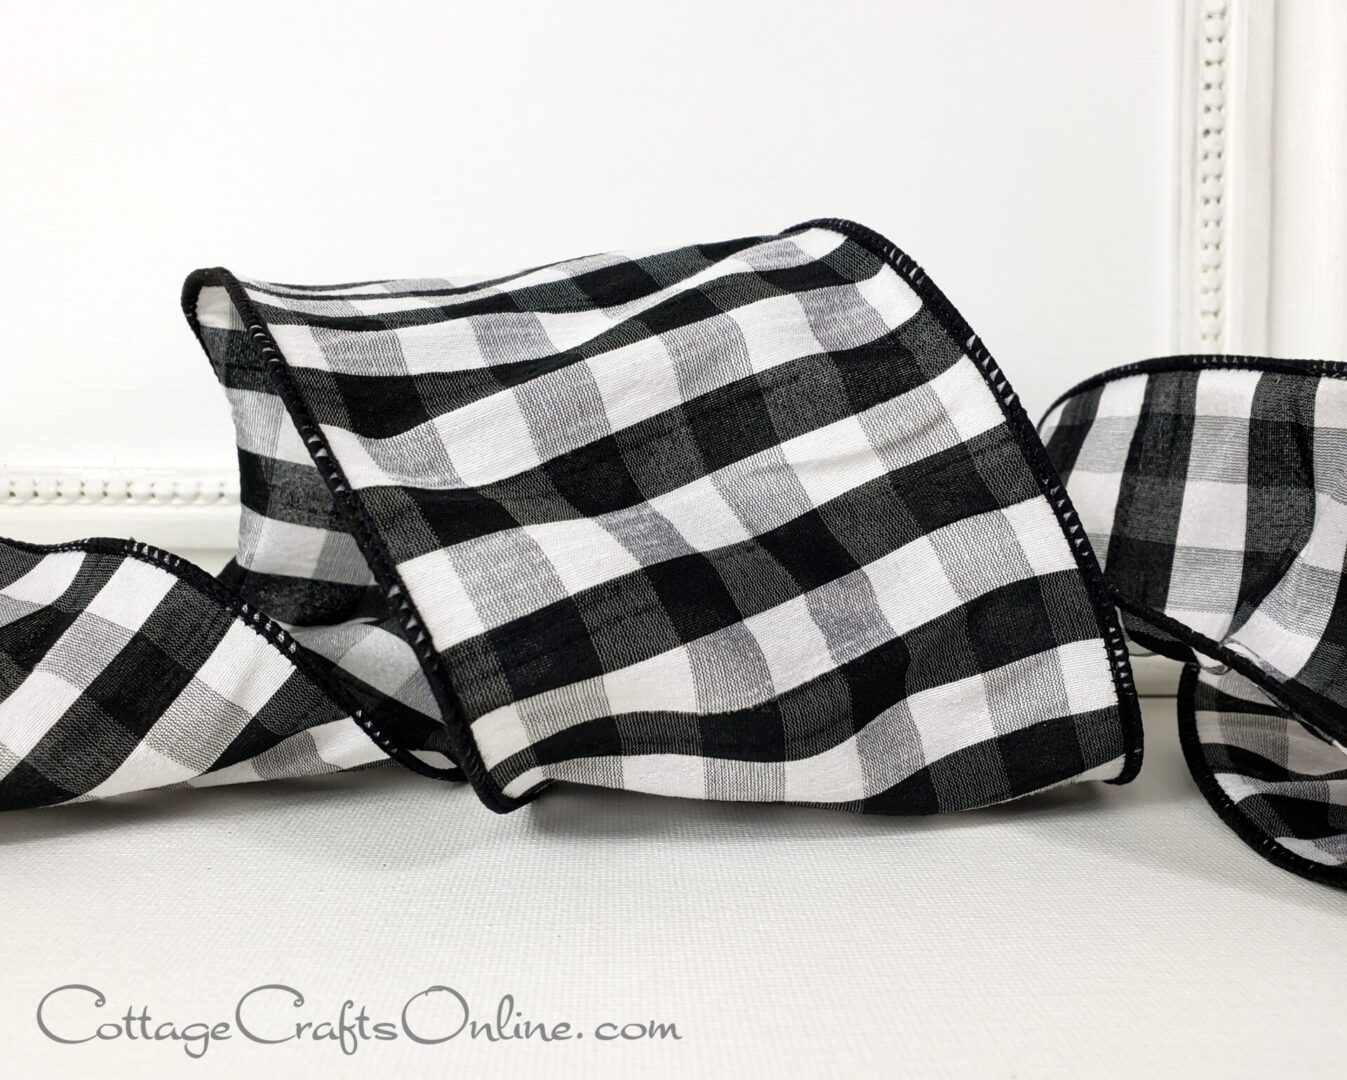 Black, white, light grey check on 4" wide wired ribbon from the Etsy shop of Cottage Crafts Online.